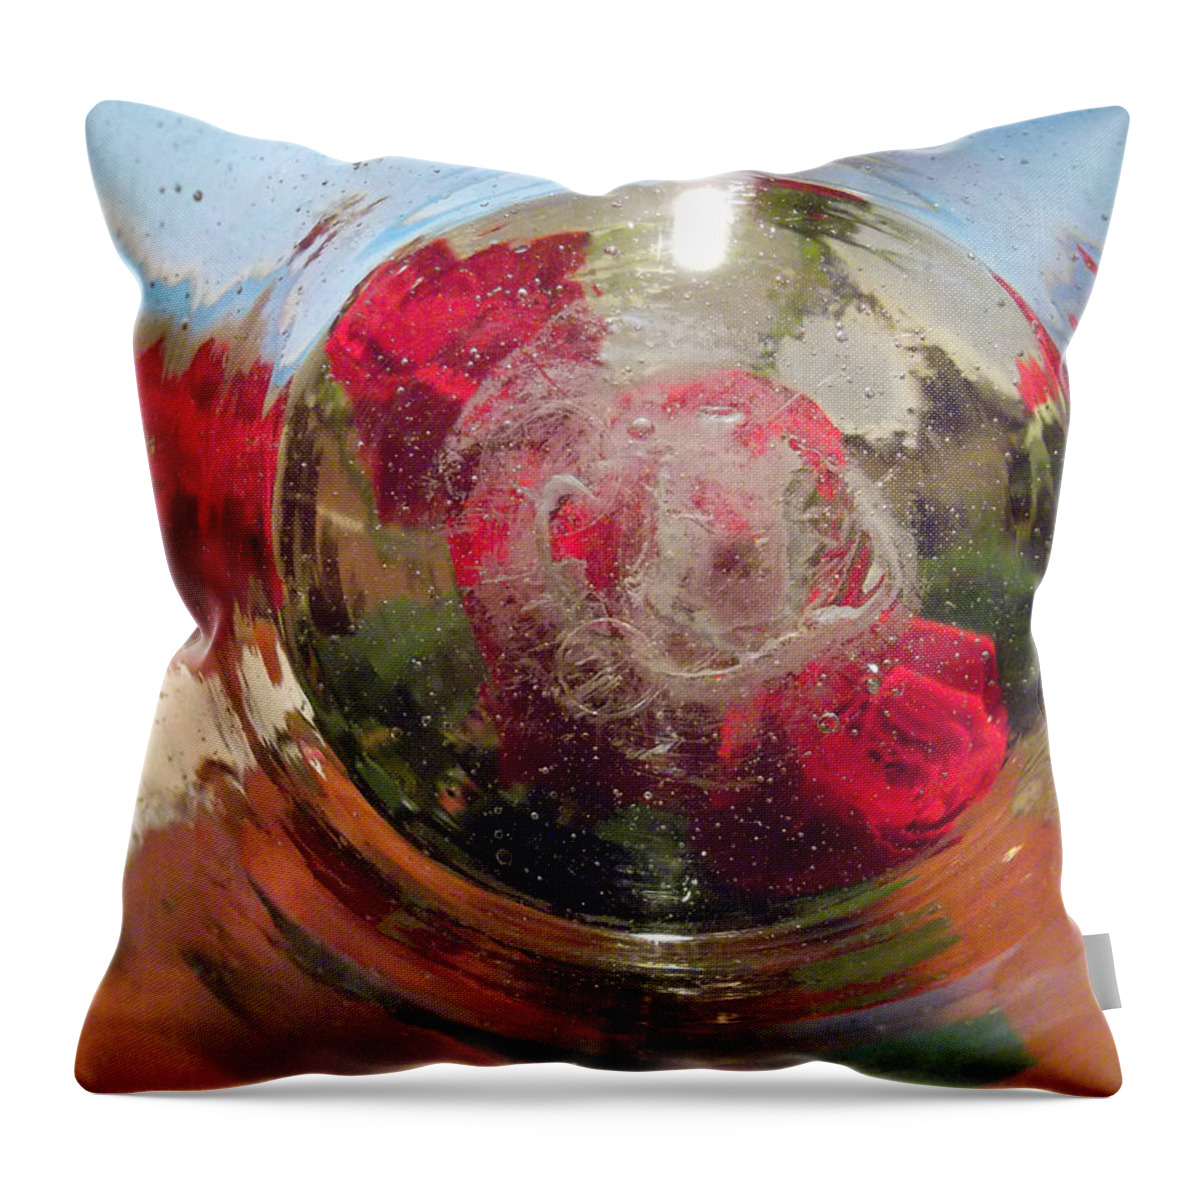 Roses Throw Pillow featuring the photograph Rose Colored by Susan Esbensen